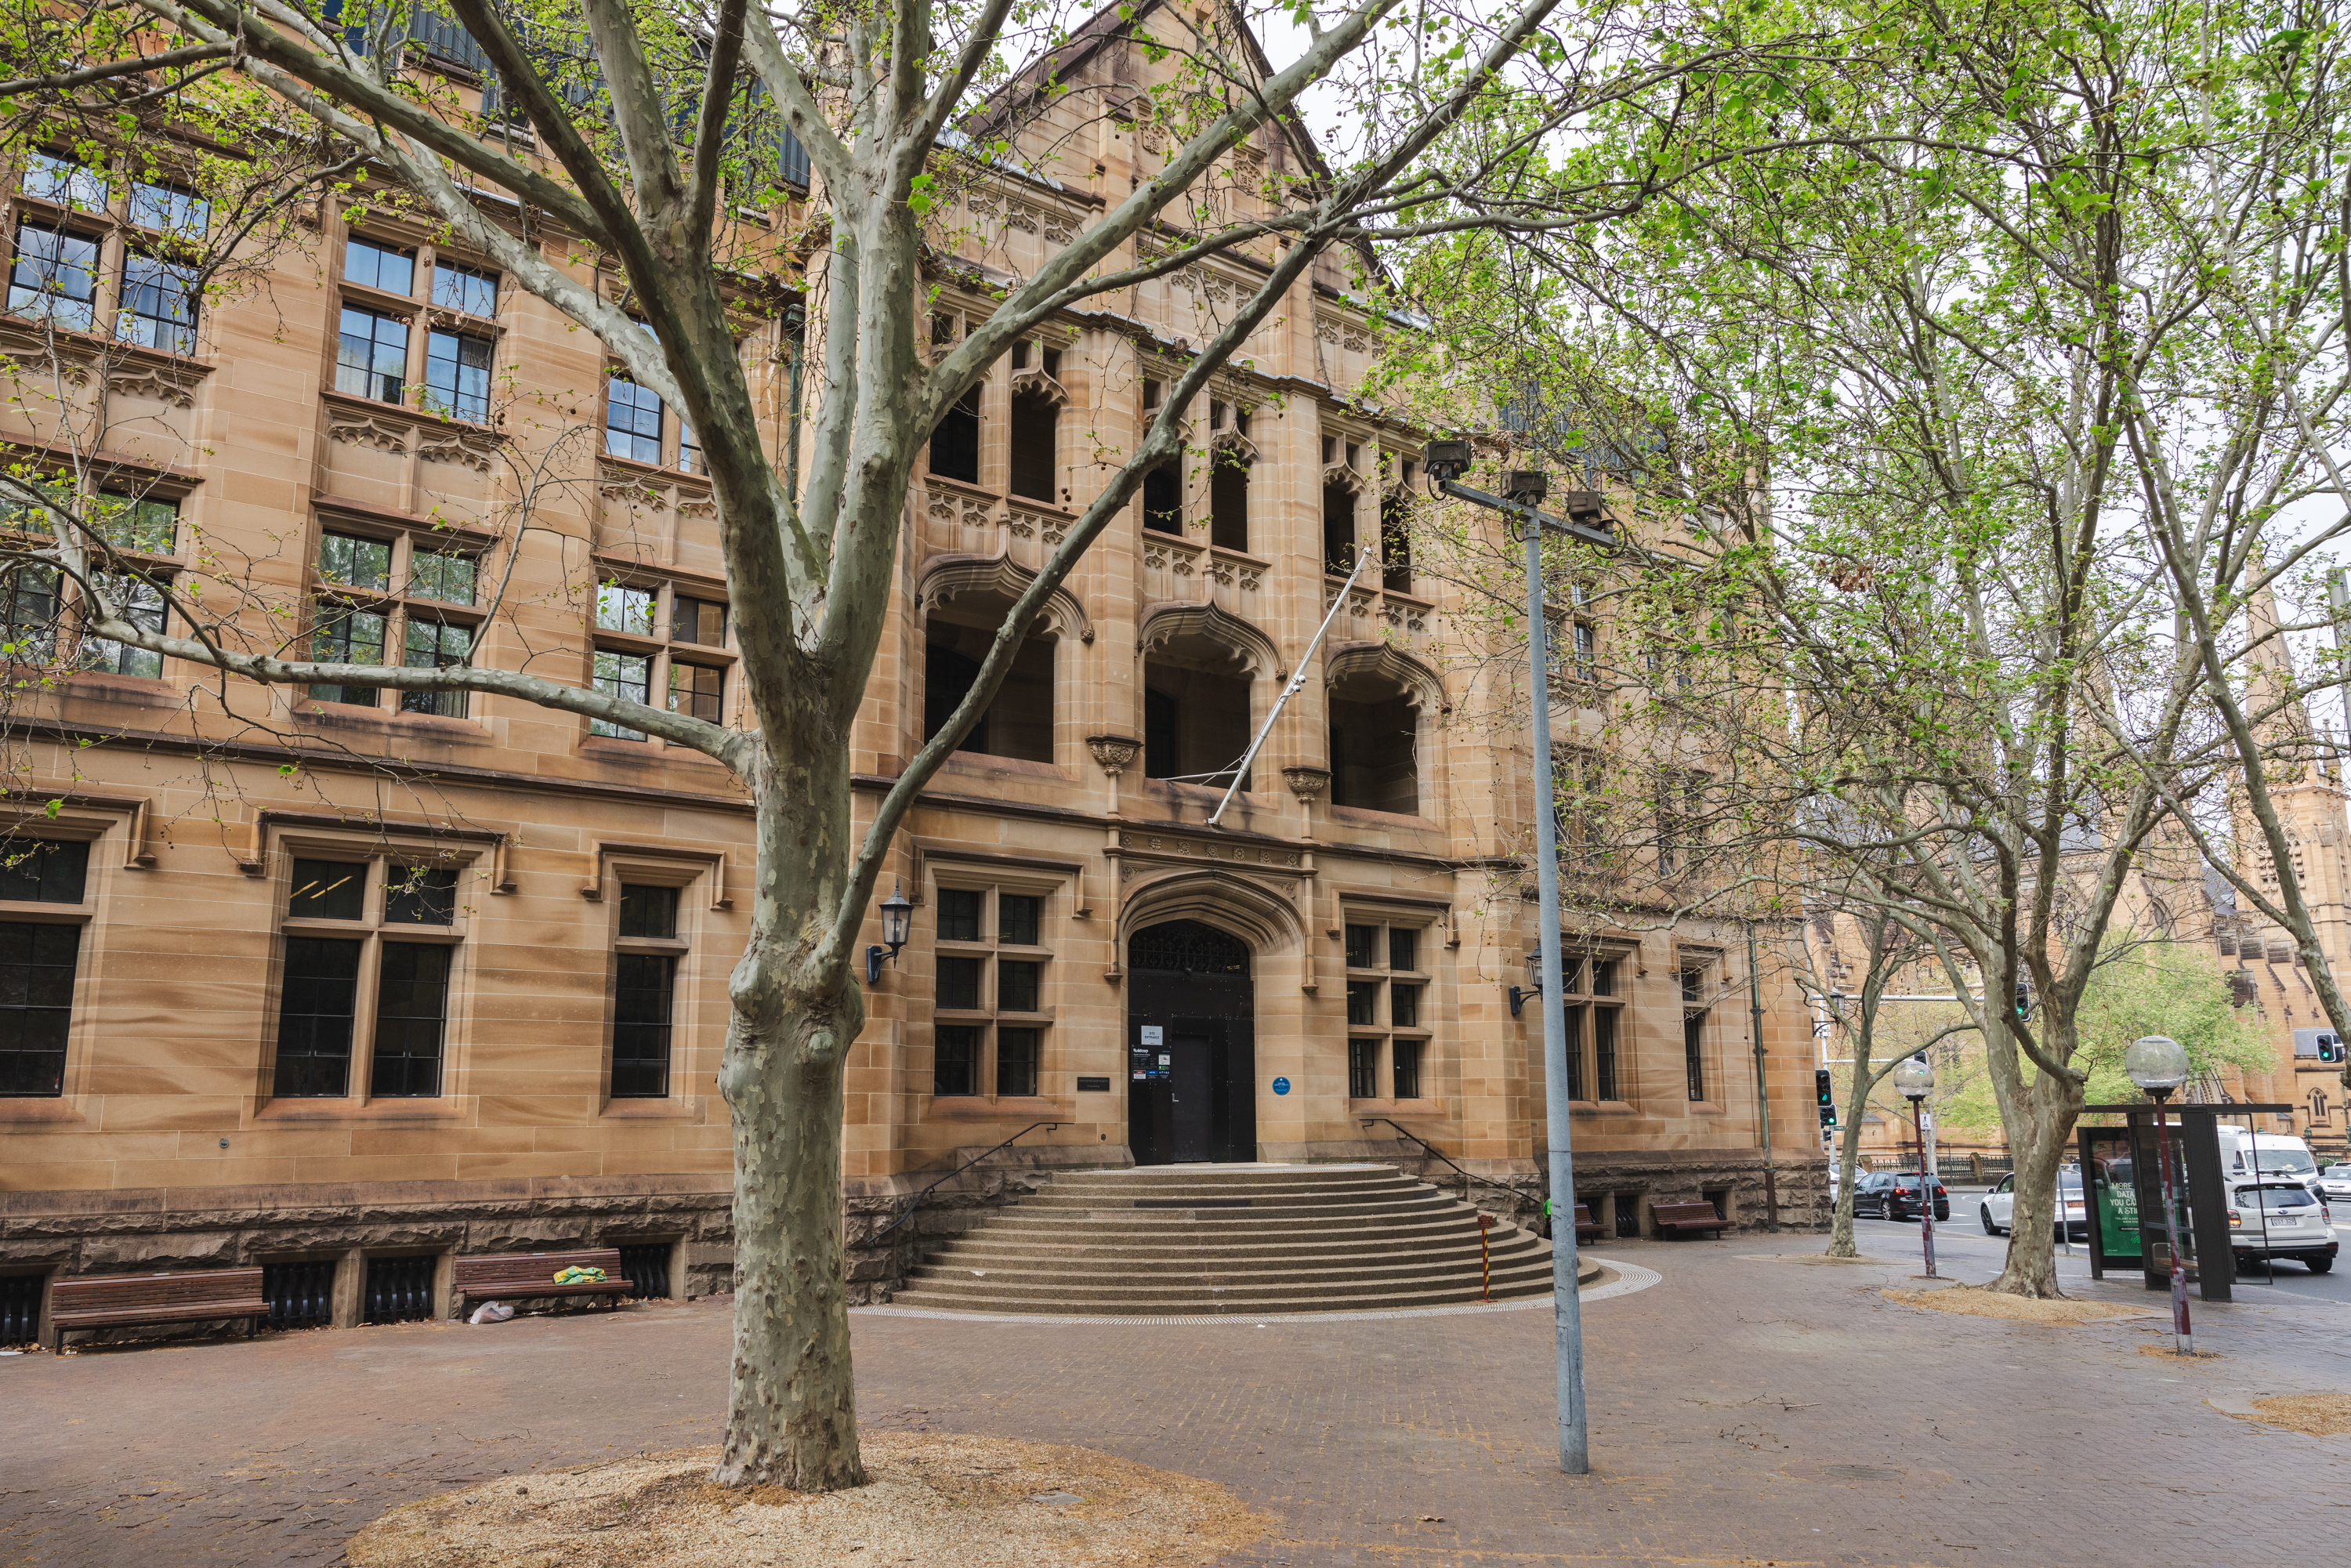 Image 7 of 7 - An image of the Registrar General's building in Sydney